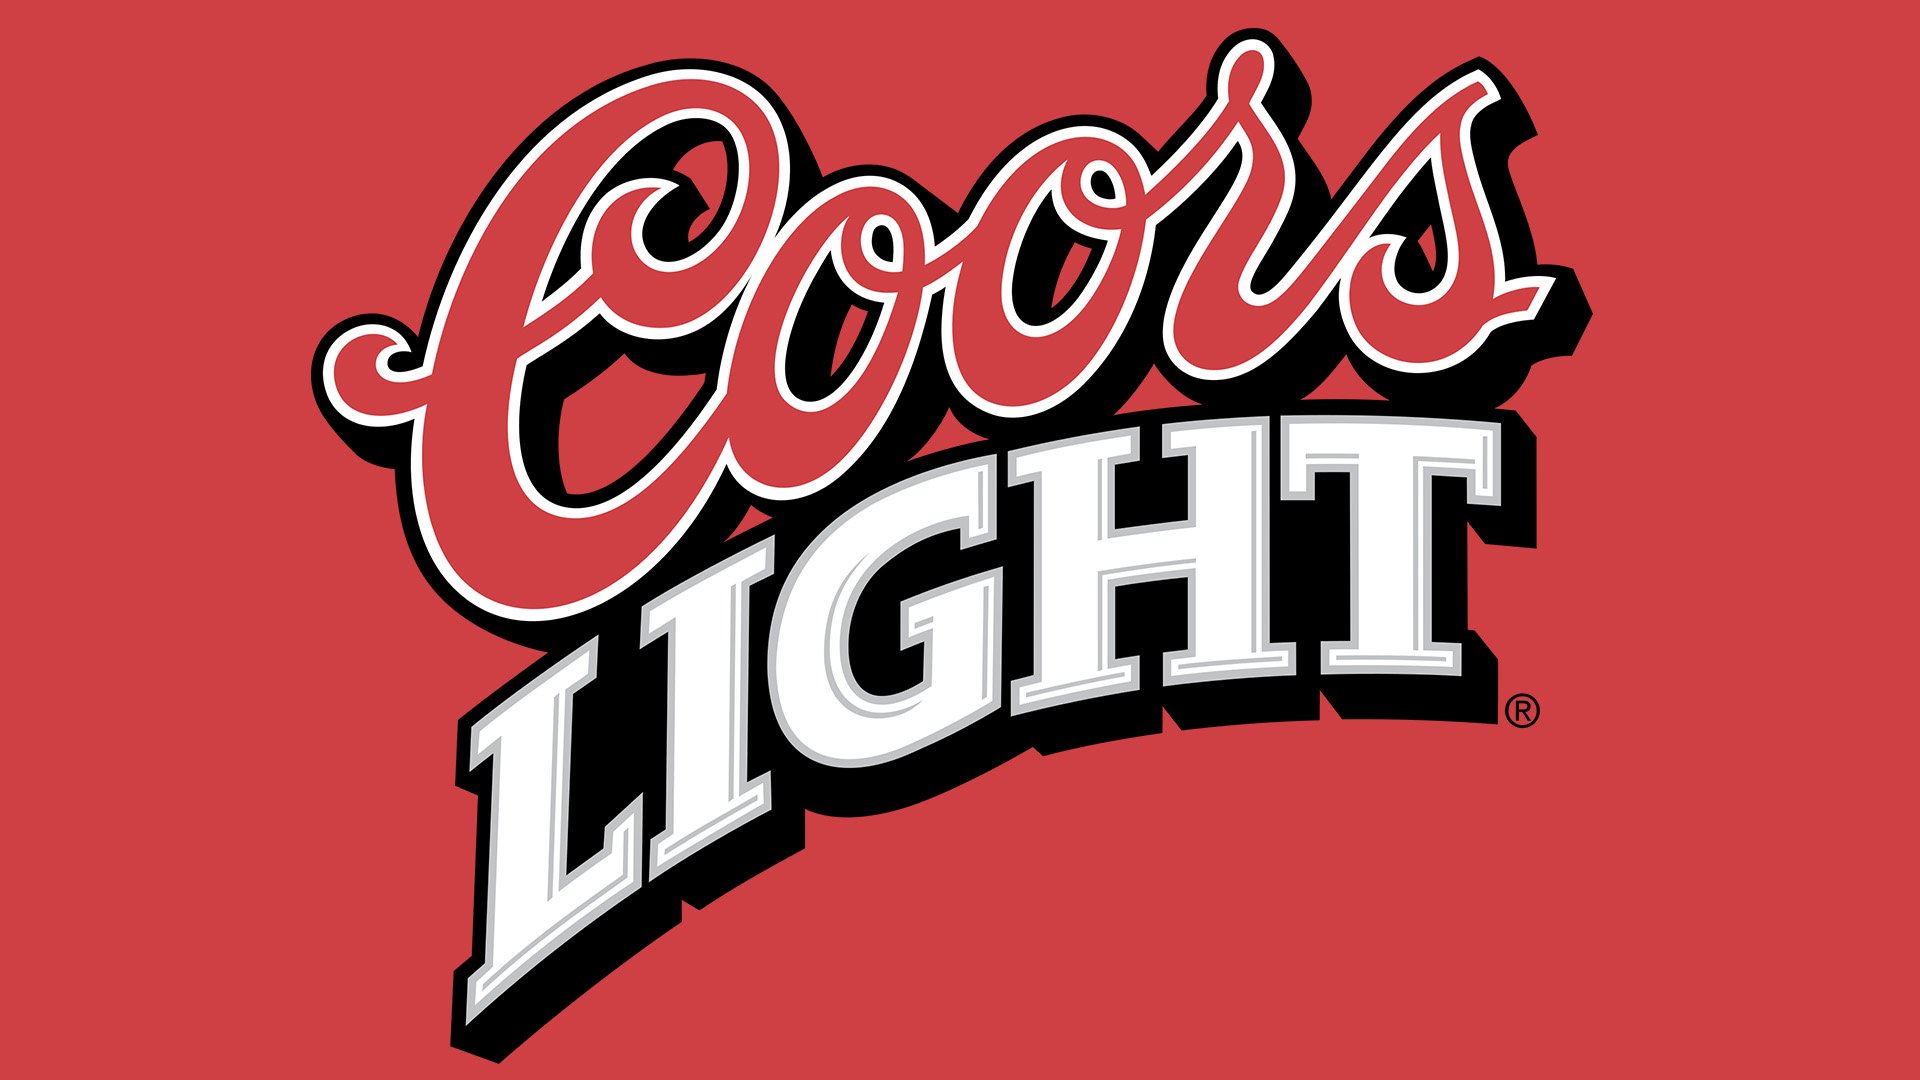 coors light background